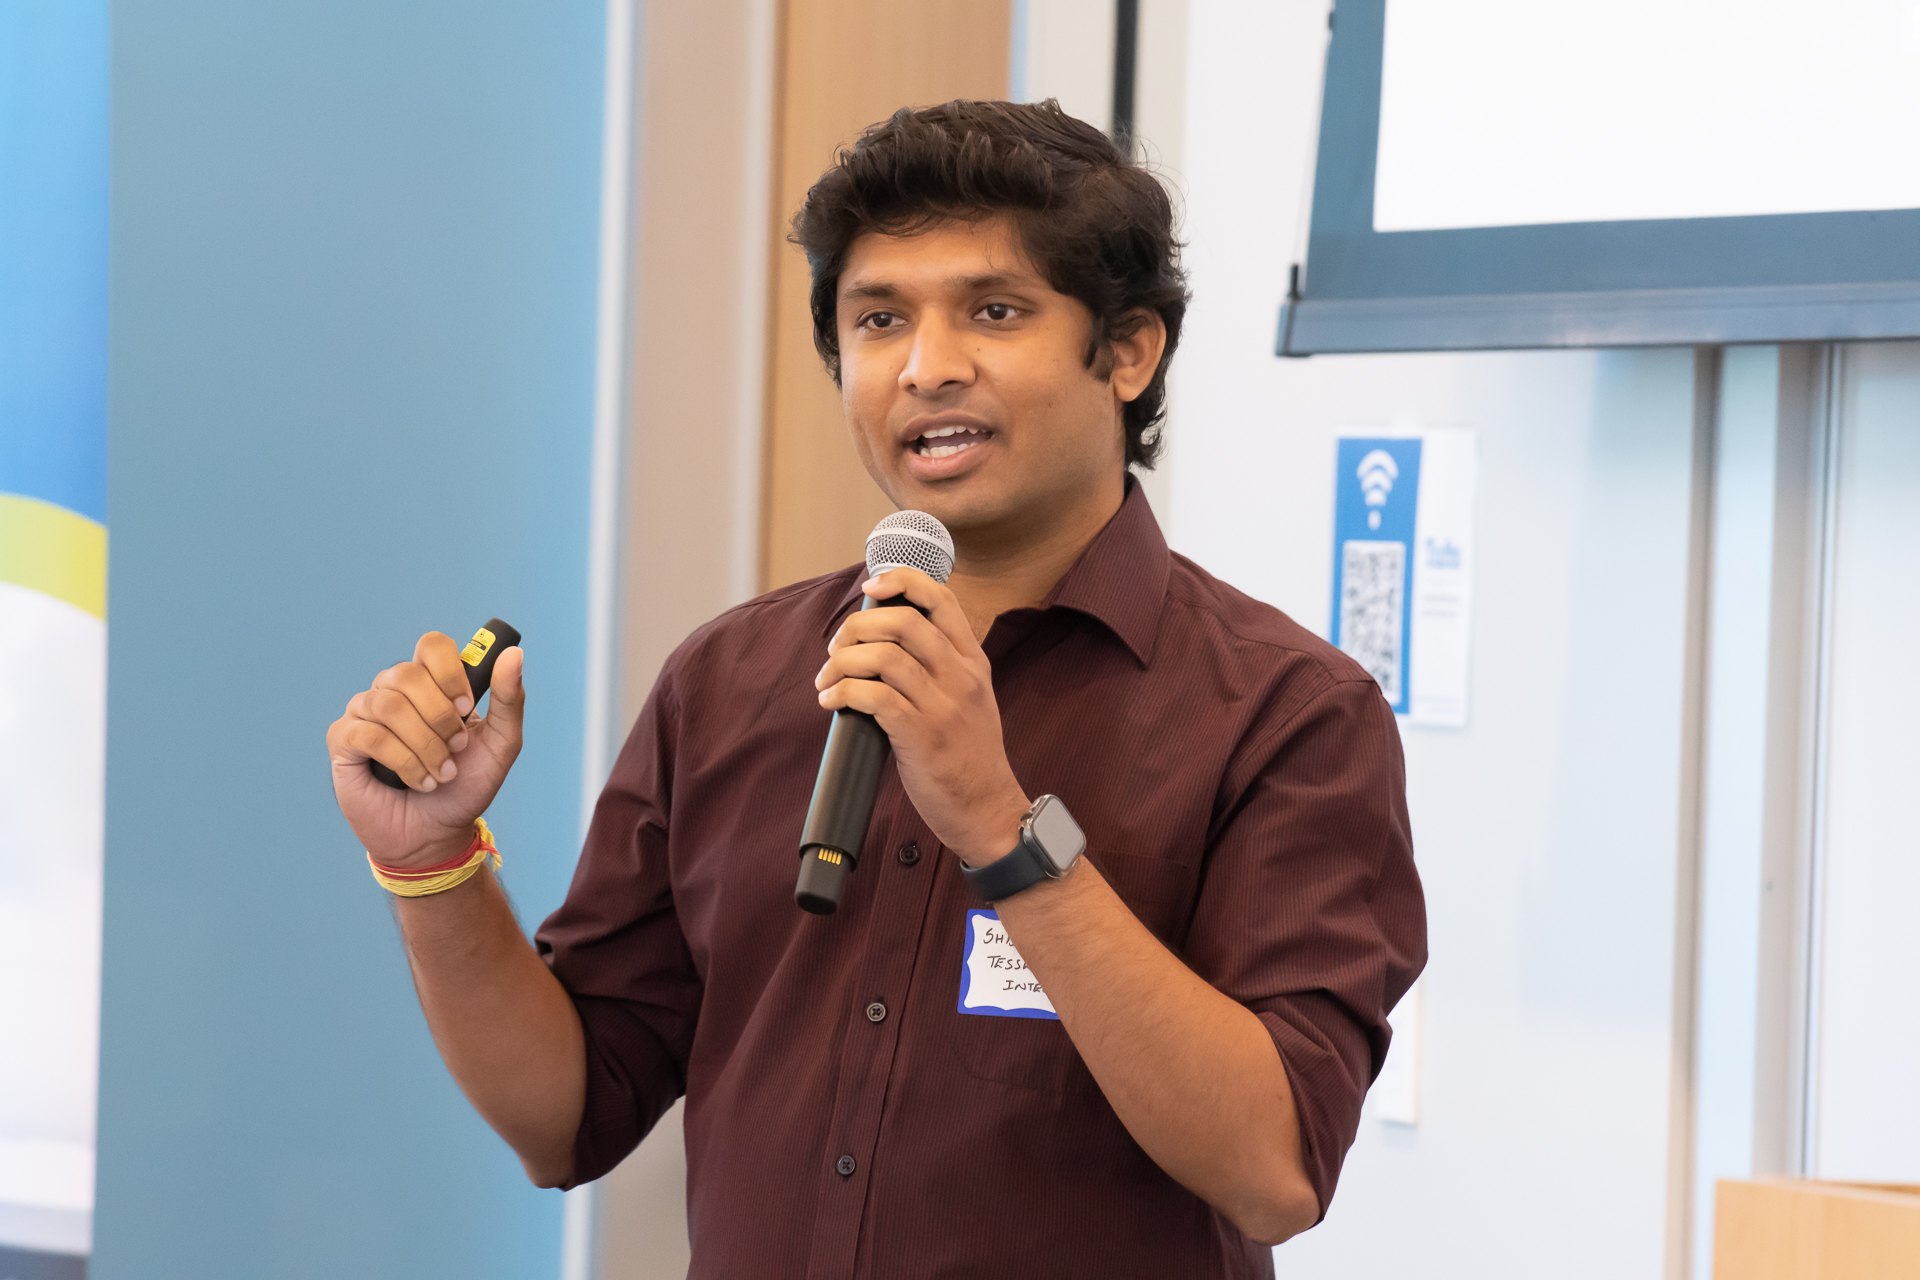 Shishir Rao, PhD, of Tessera Intelligence pitches the team’s innovative solution to improve the quality of videos for both human and AI consumption.